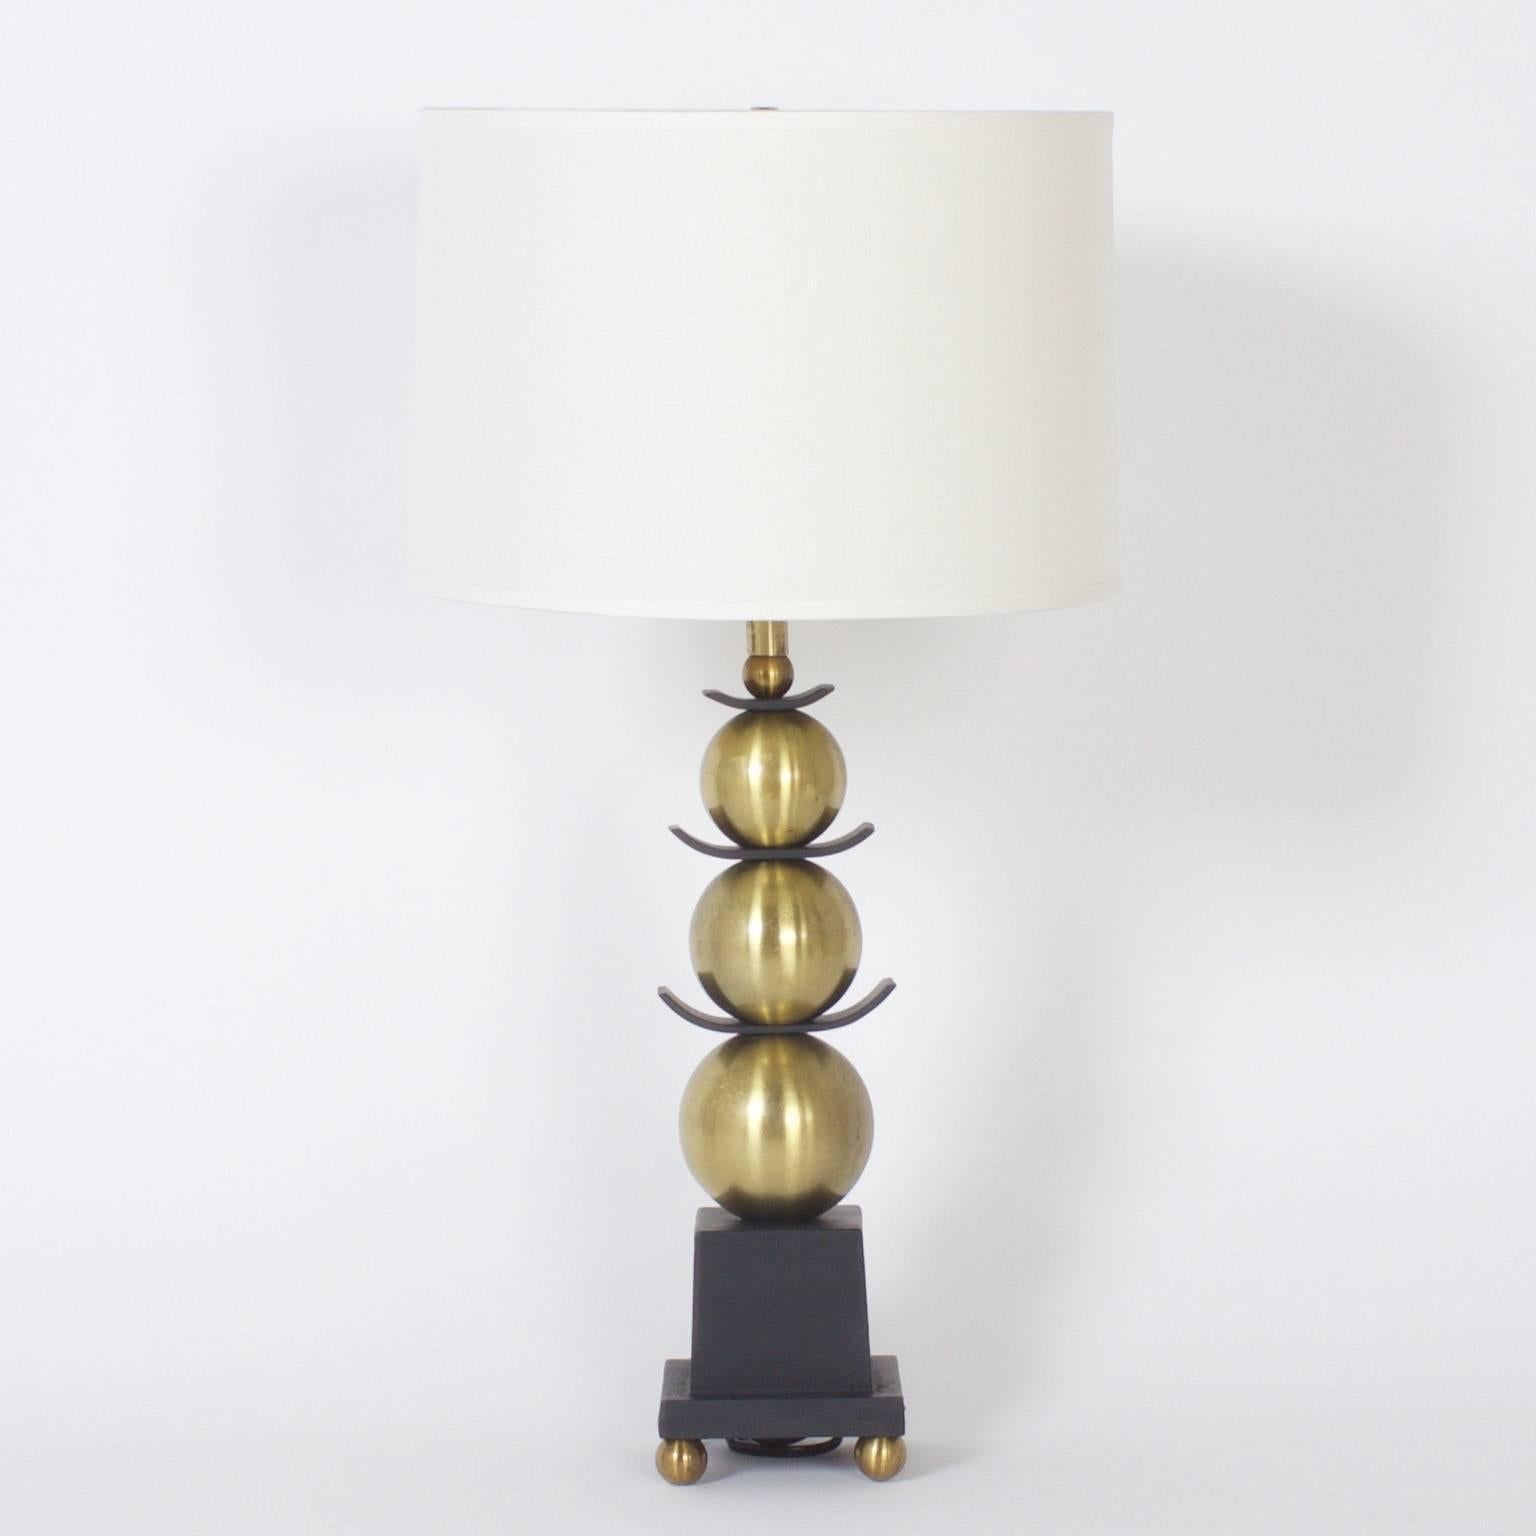 Swank pair of midcentury, Asian Modern stacked ball table lamps with a strong James Mont vibe. Crafted of spun brass and ebonized metal. Newly wired.